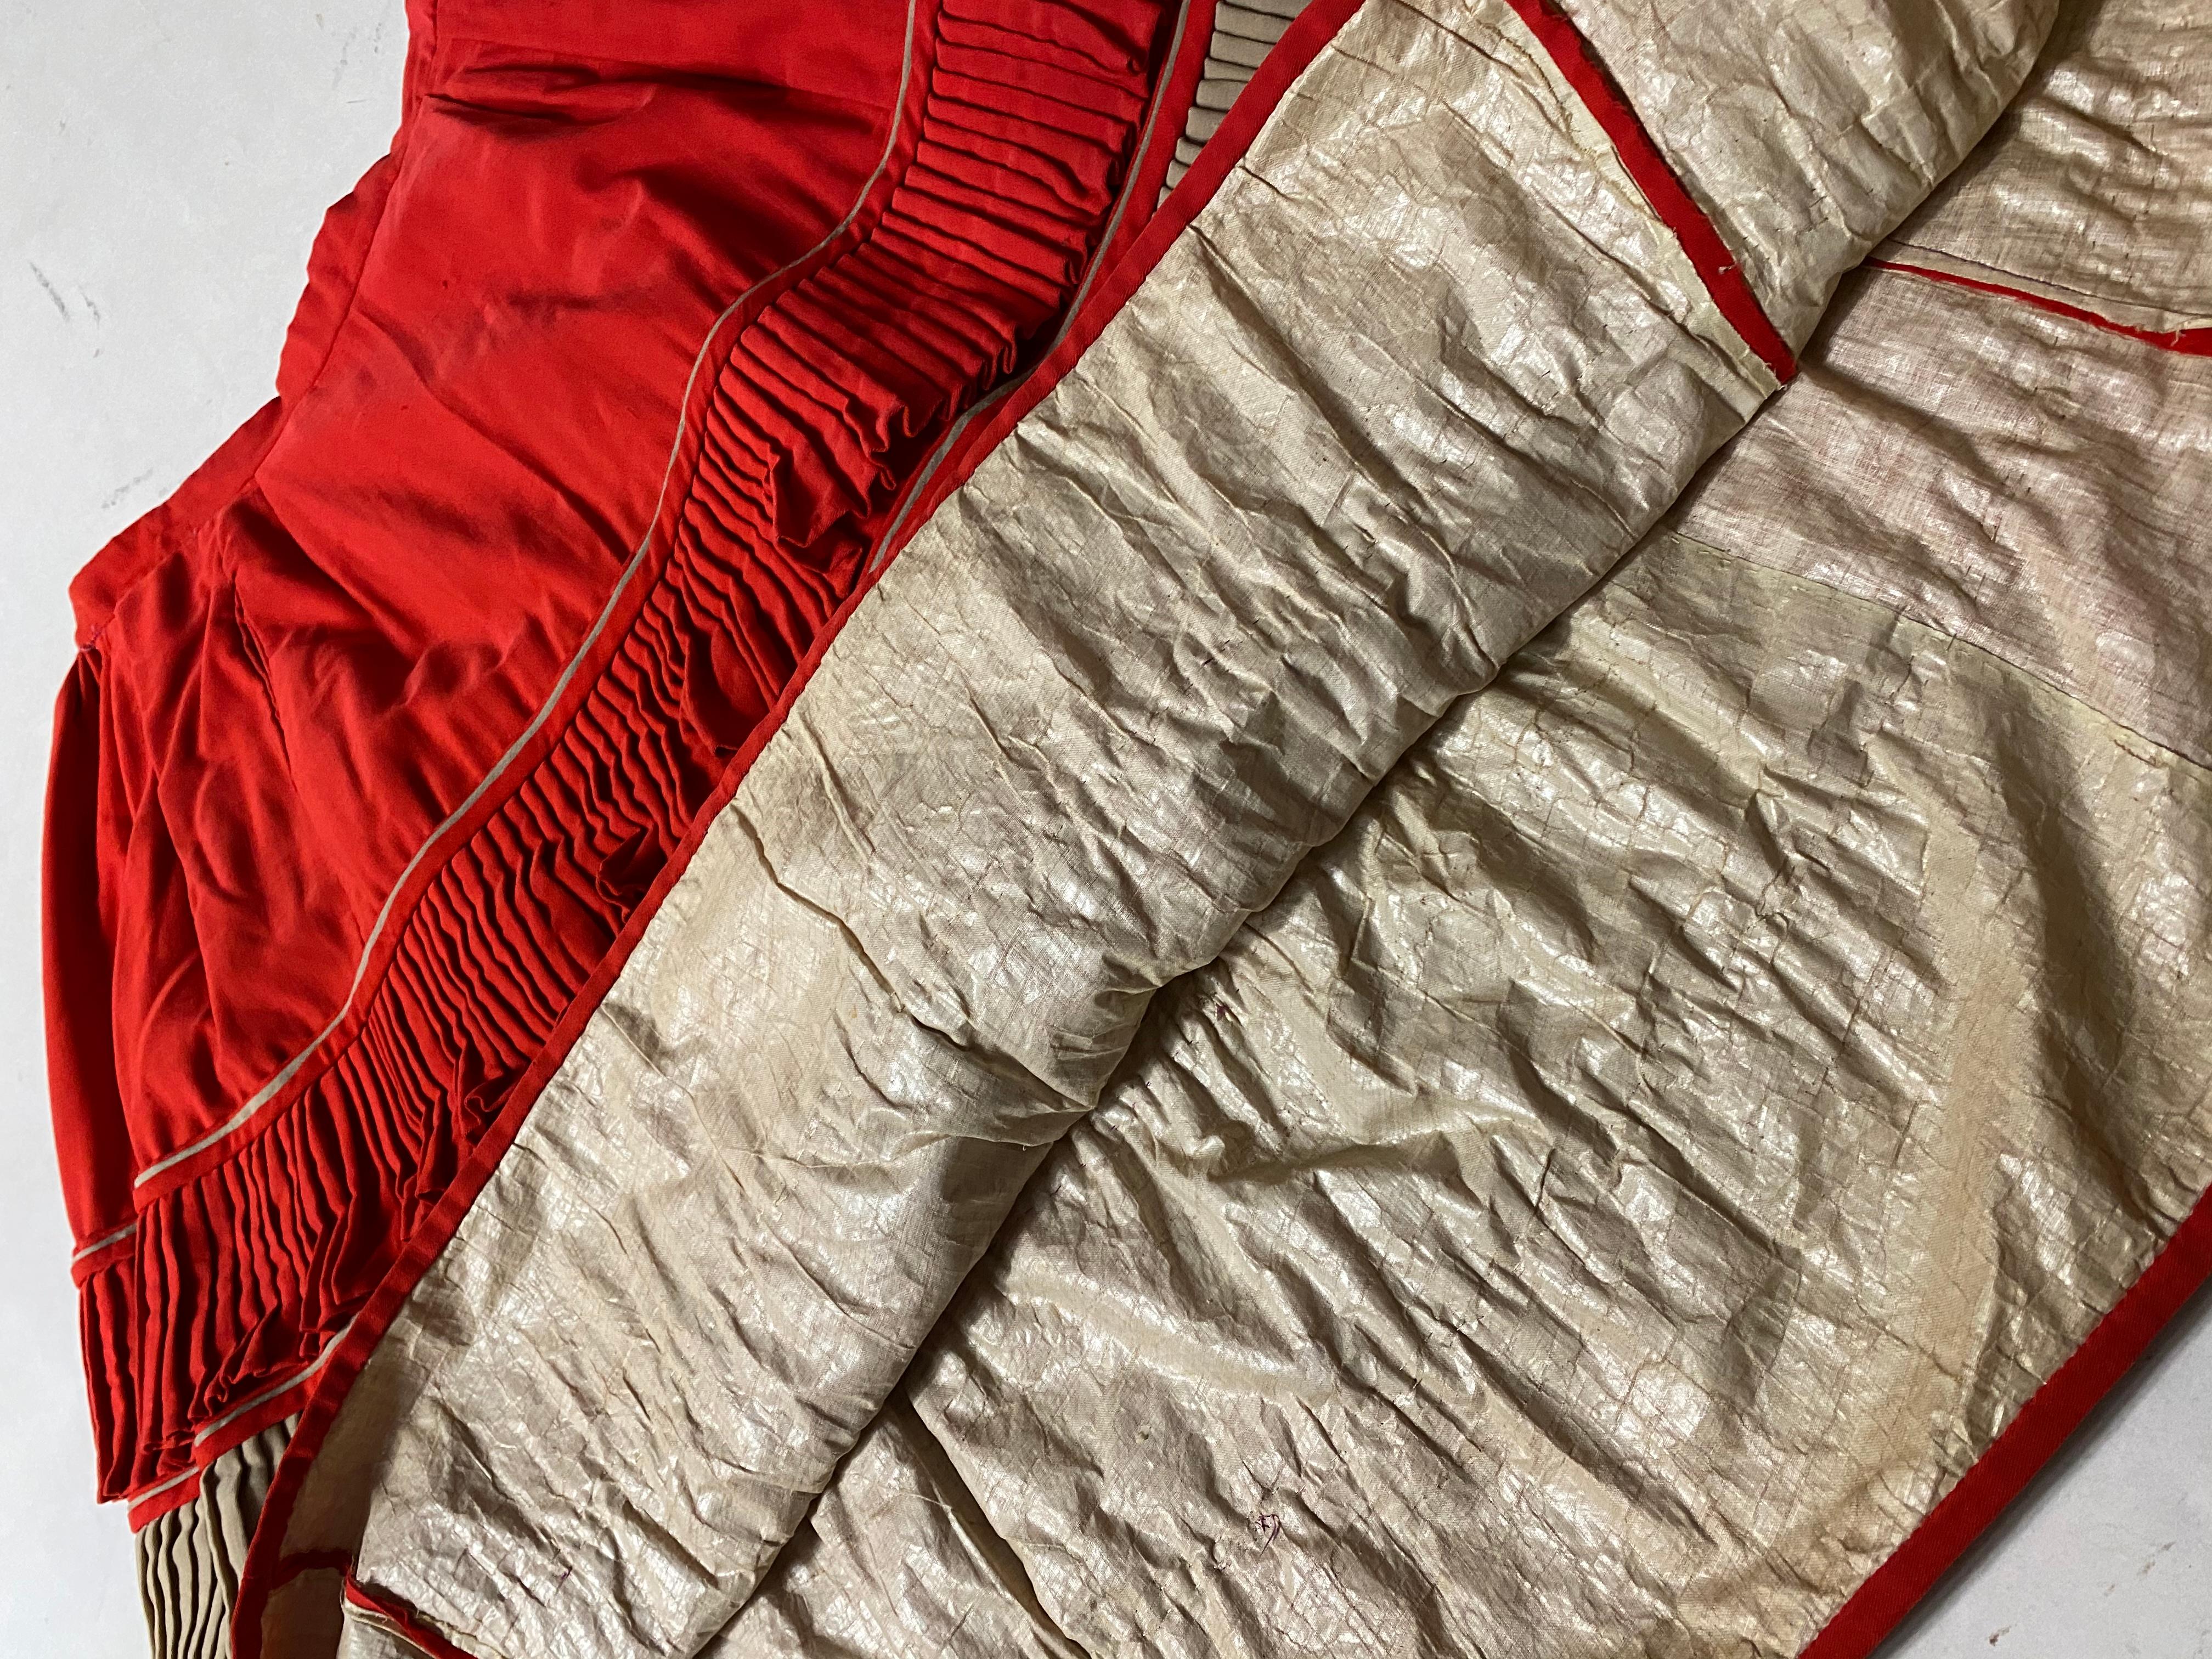 An Historical Circus, Fancy or Memorial Dress in Scarlet Challis USA Circa 1890 For Sale 6